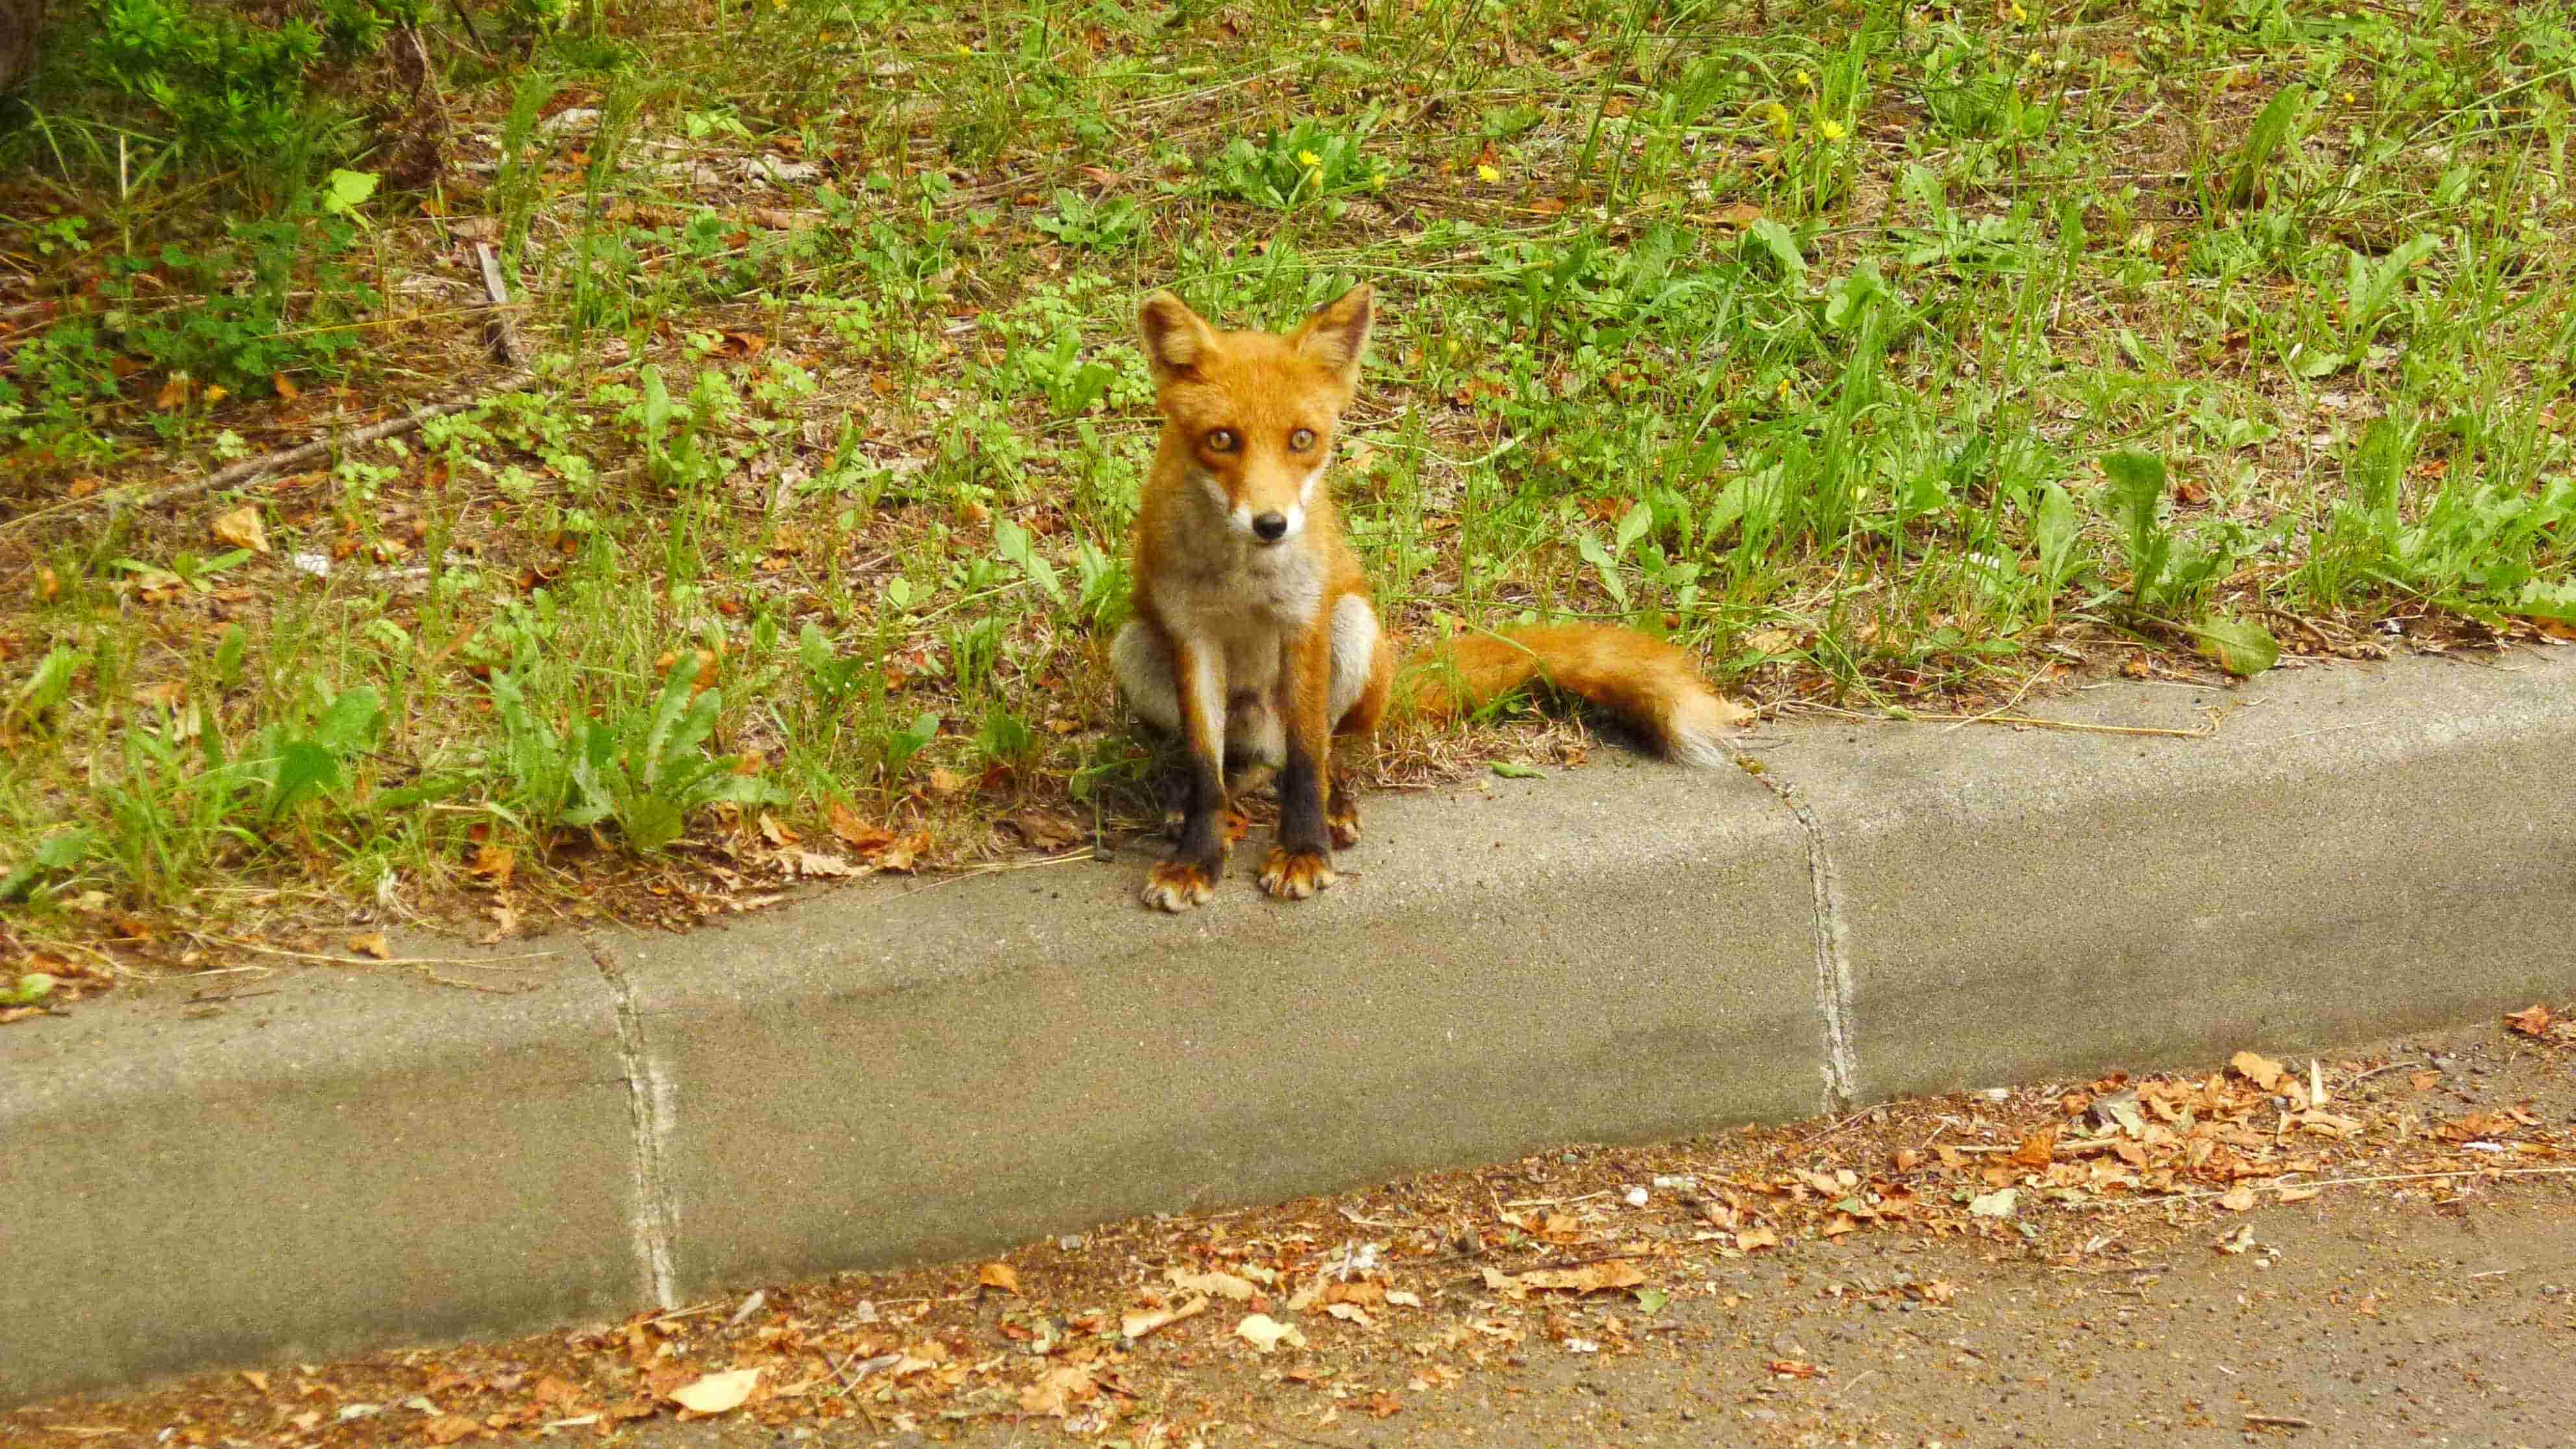 Front view of a red fox sitting on top of a street curb, with a grass area behind it